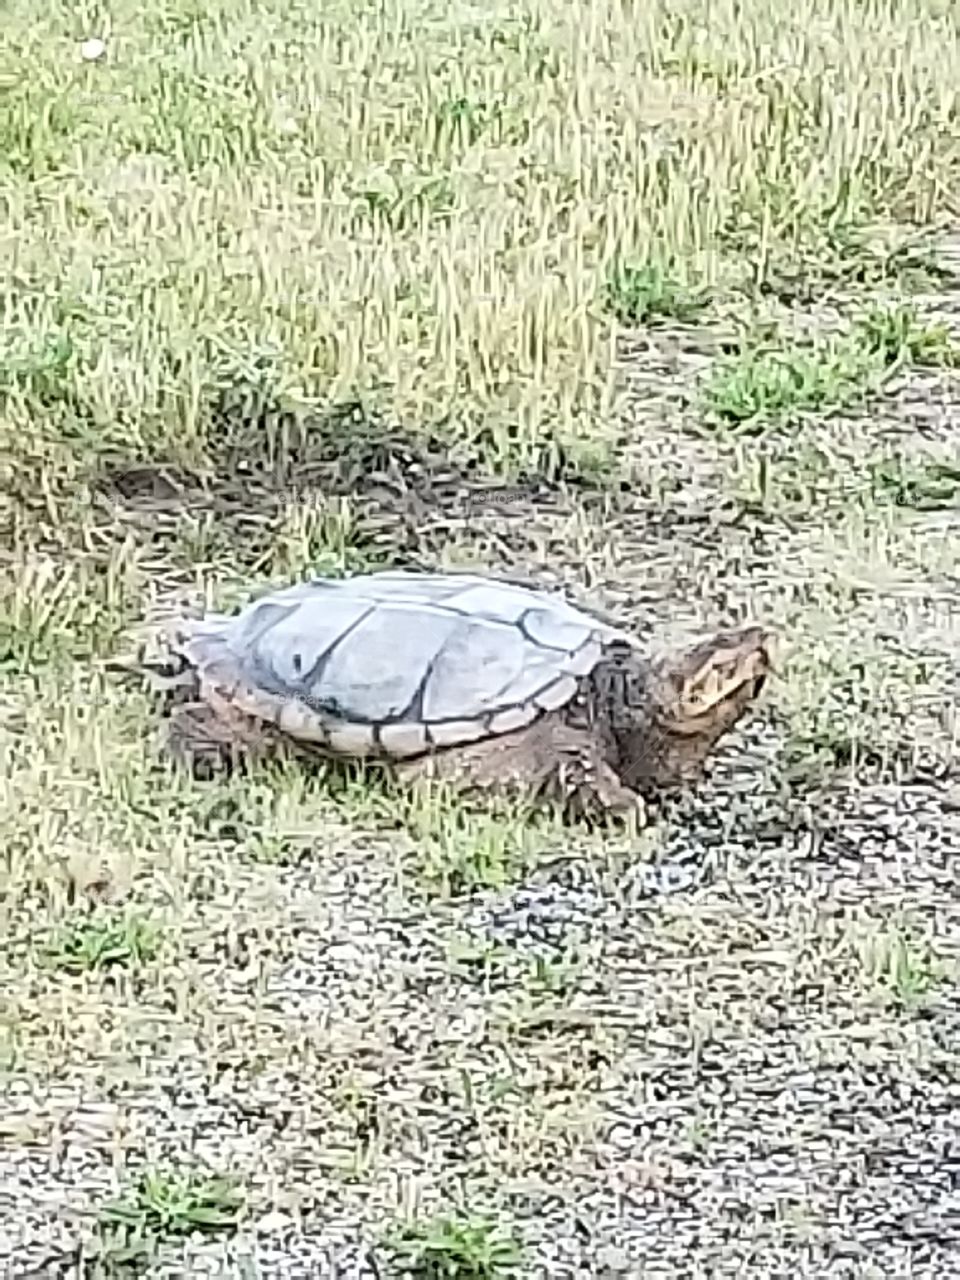 On a walk when I came across this huge tortoise. It was just chilling in the middle of a grassy field.